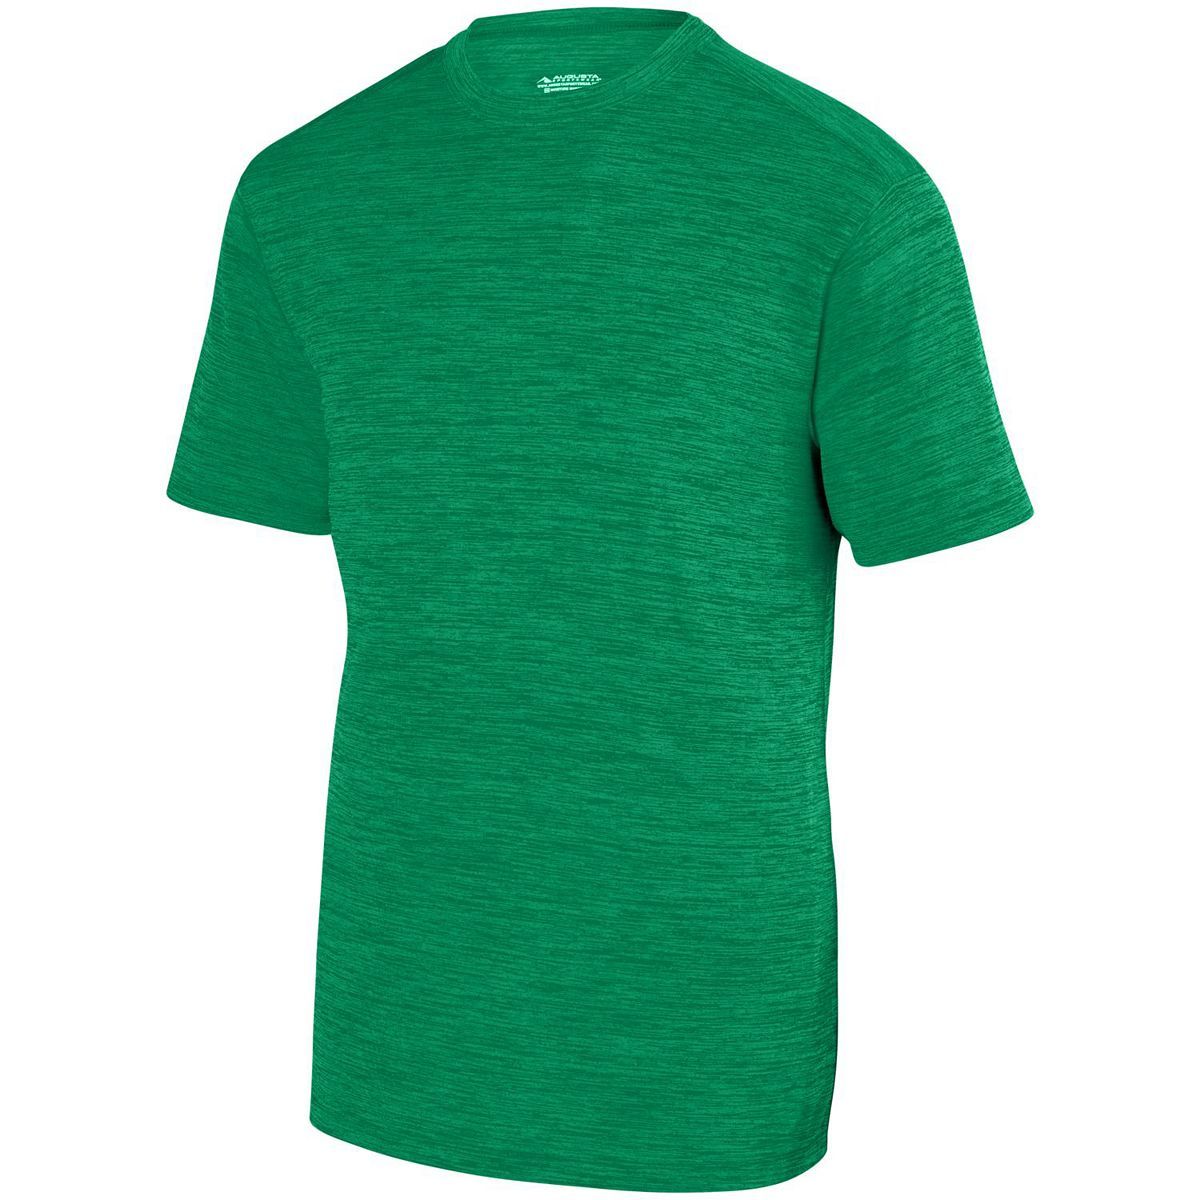 Augusta Sportswear Youth Shadow Tonal Heather Training Tee in Kelly  -Part of the Youth, Youth-Tee-Shirt, T-Shirts, Augusta-Products, Shirts, Tonal-Fleece-Collection product lines at KanaleyCreations.com